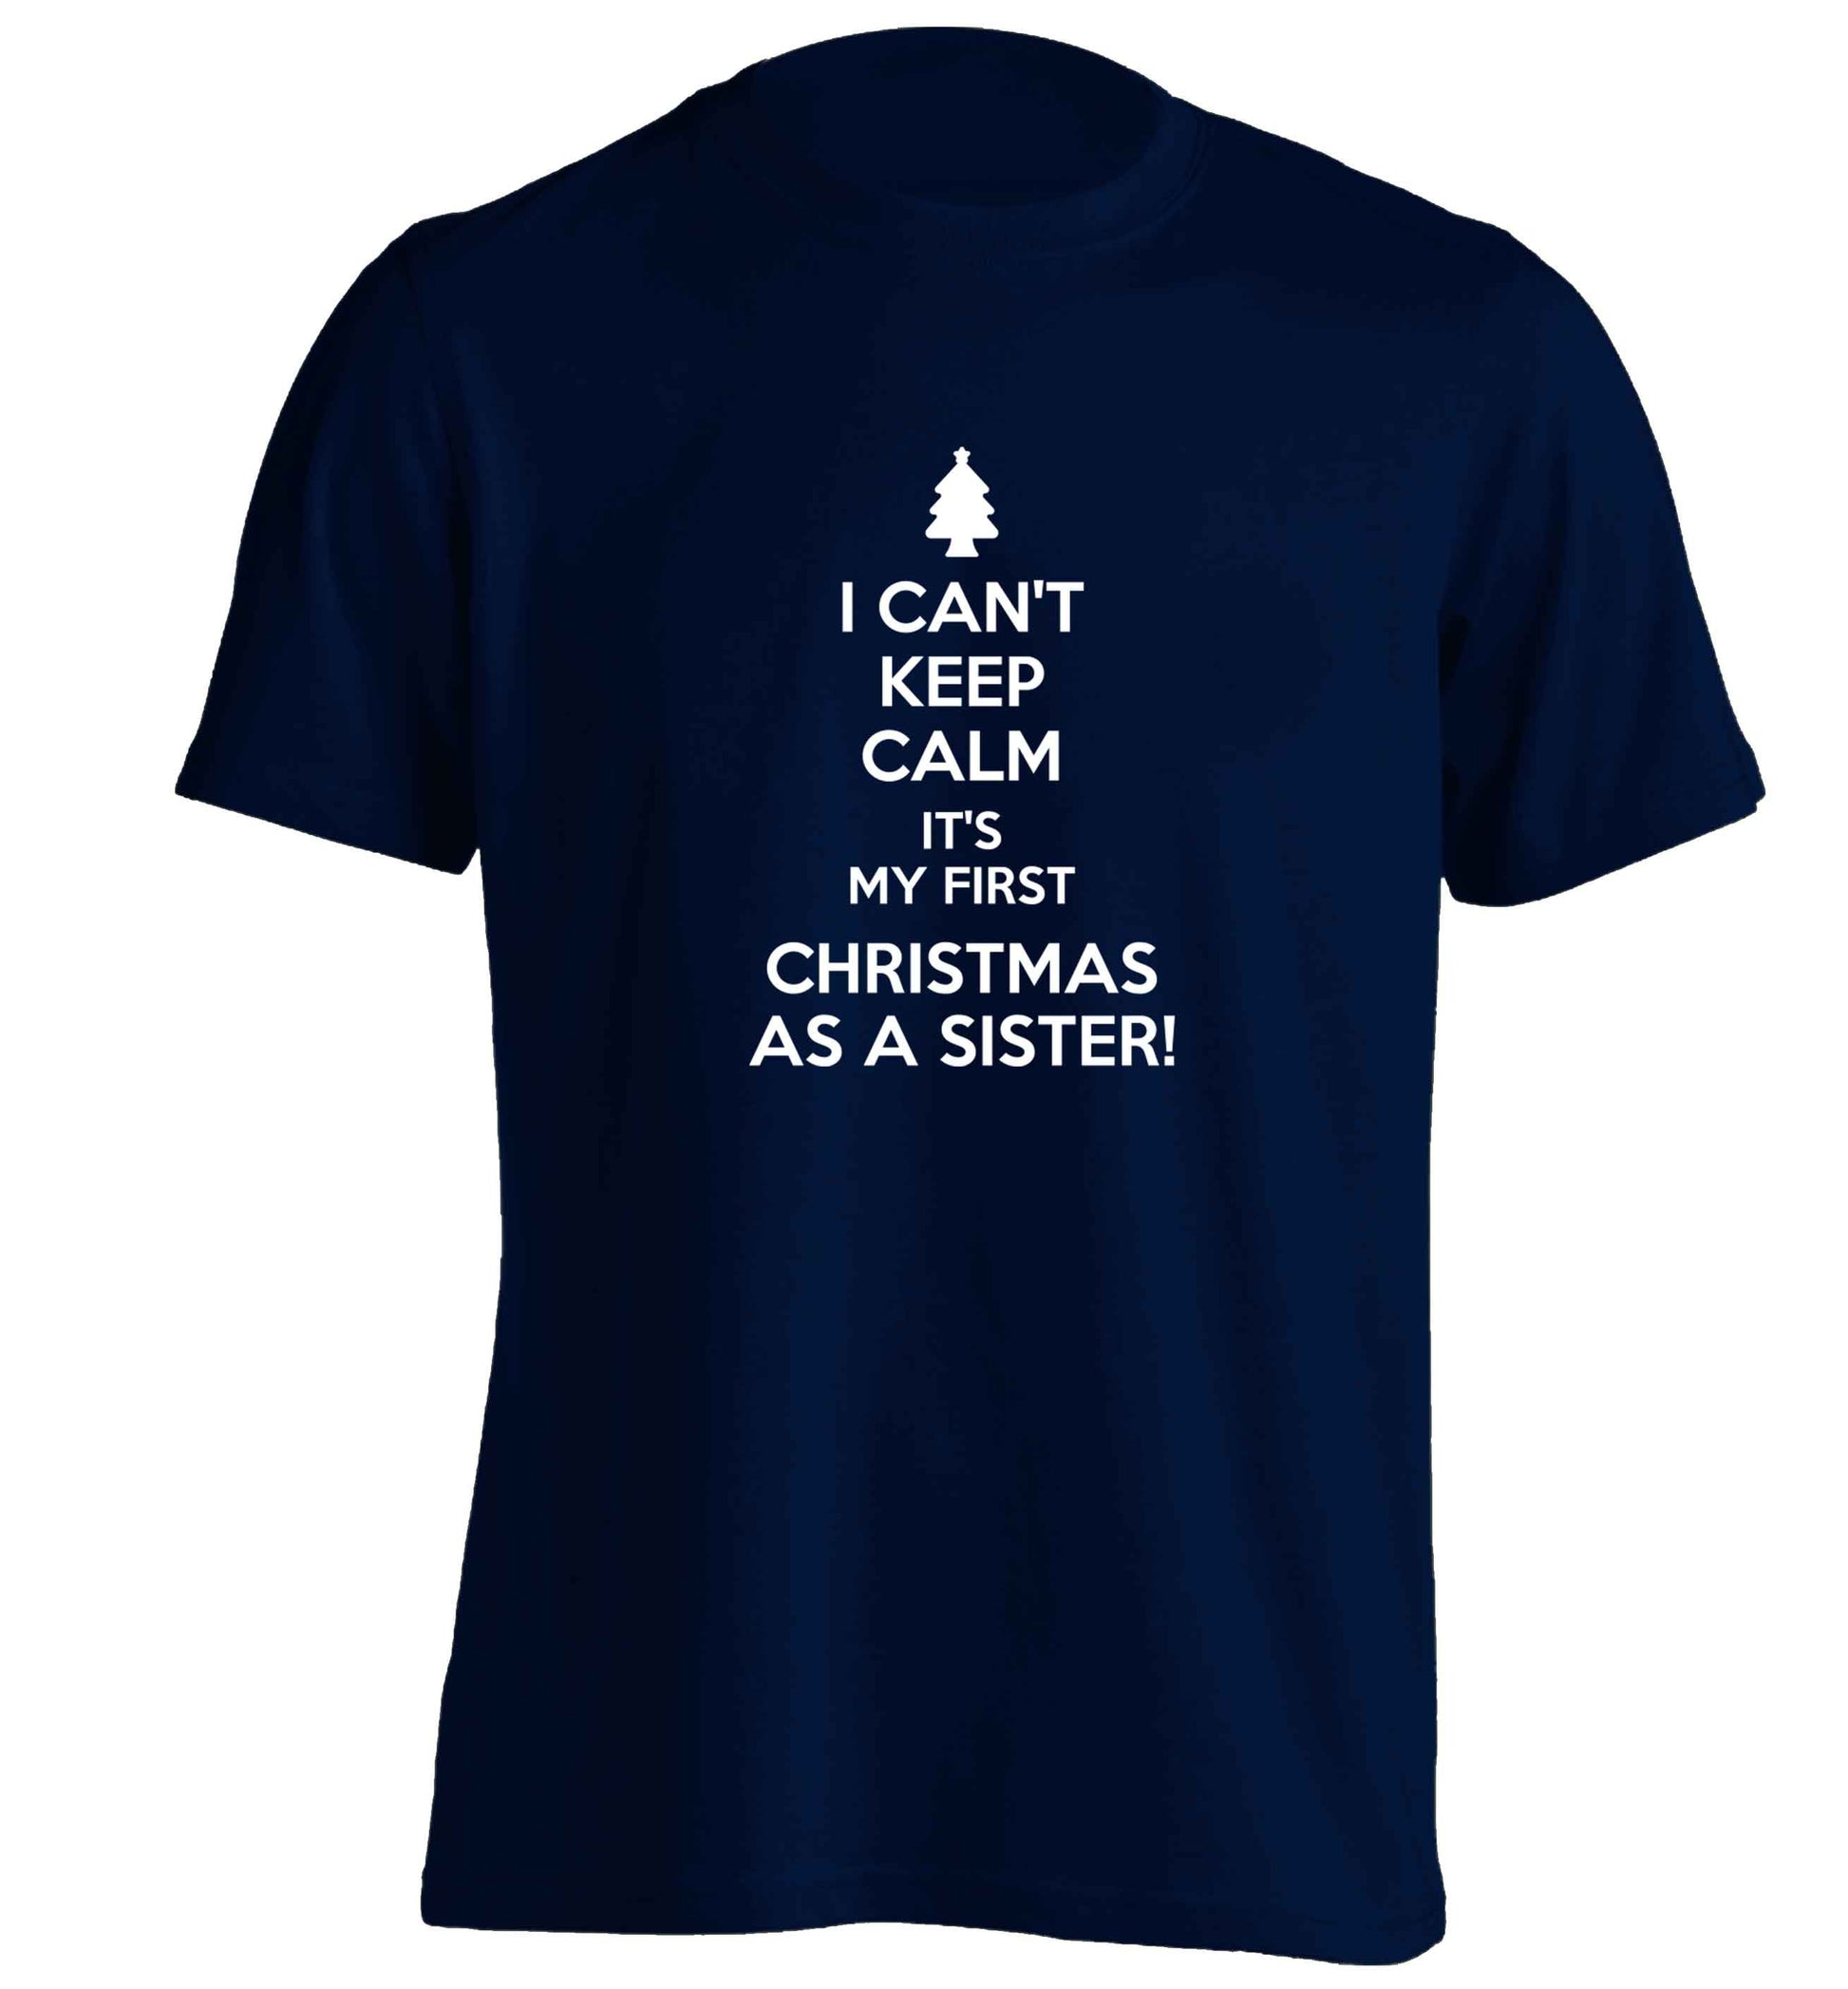 I can't keep calm it's my first Christmas as a sister! adults unisex navy Tshirt 2XL